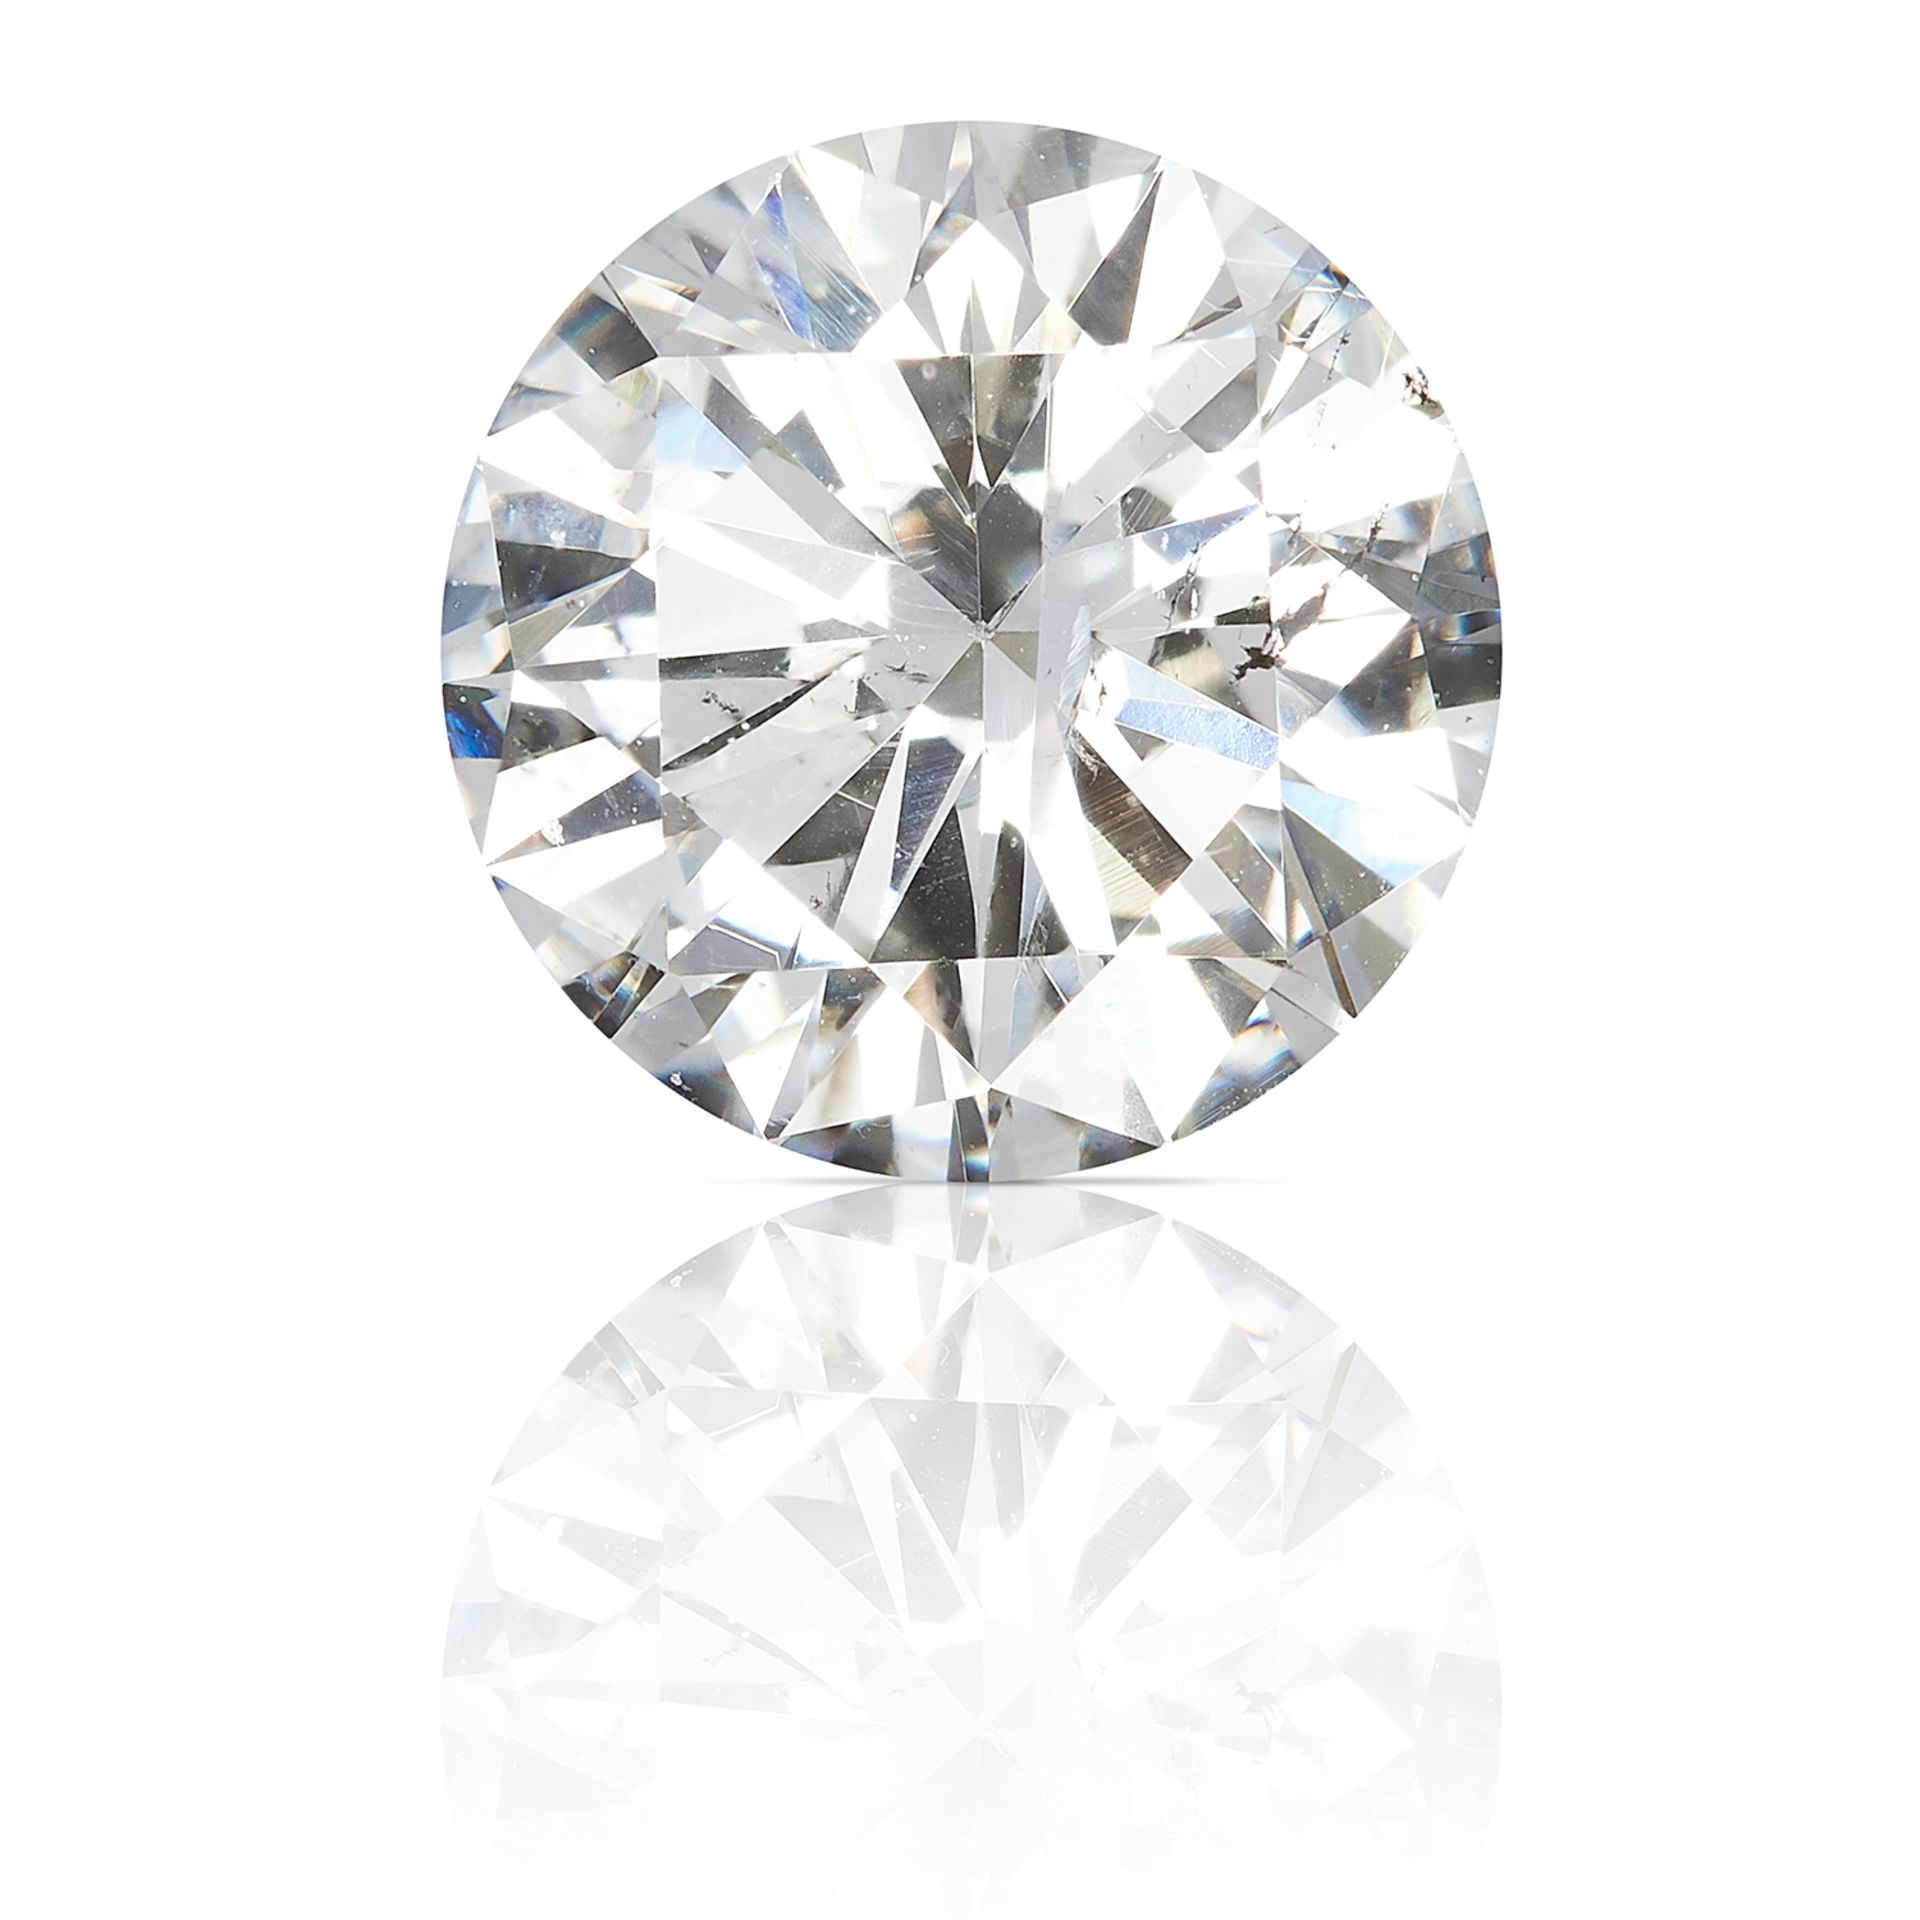 A ROUND CUT MODERN BRILLIANT DIAMOND TOTALLING 0.86cts, UNMOUNTED.